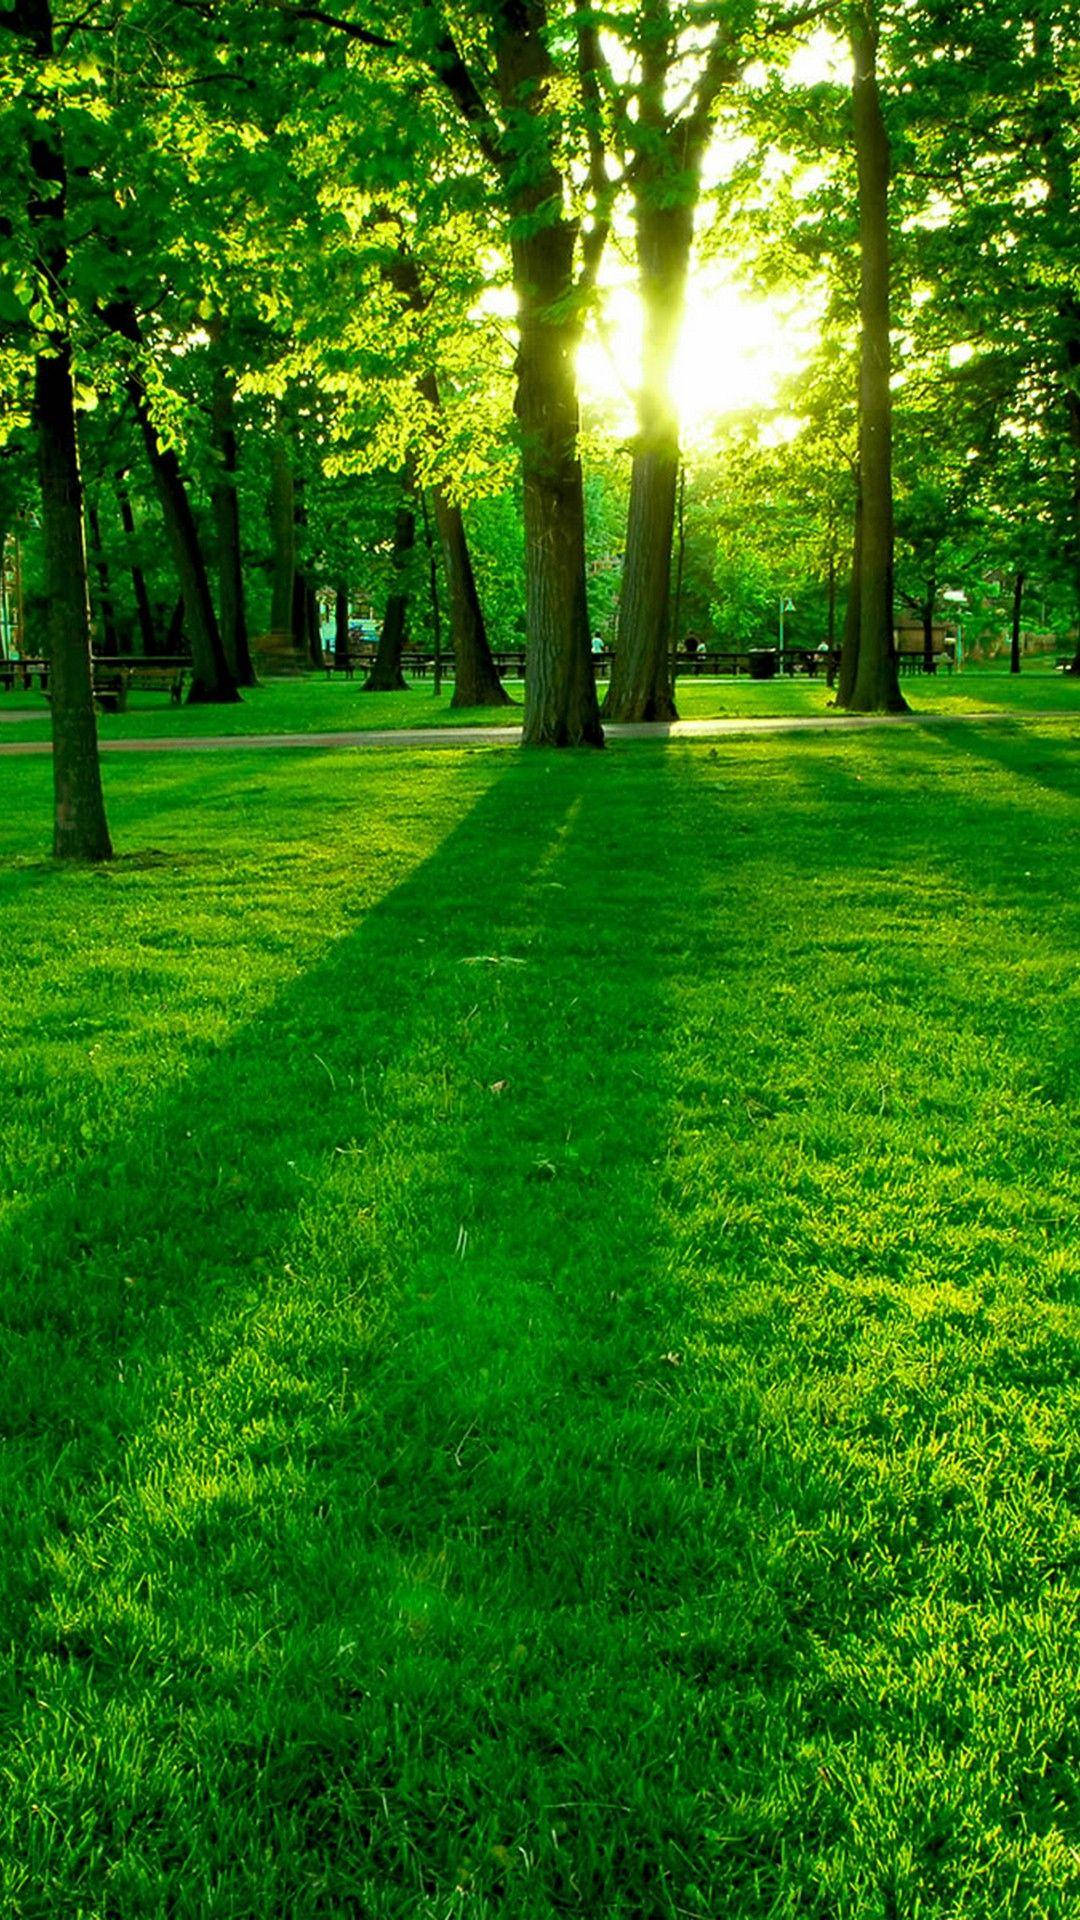 Green Grass And Trees Nature Theme Background